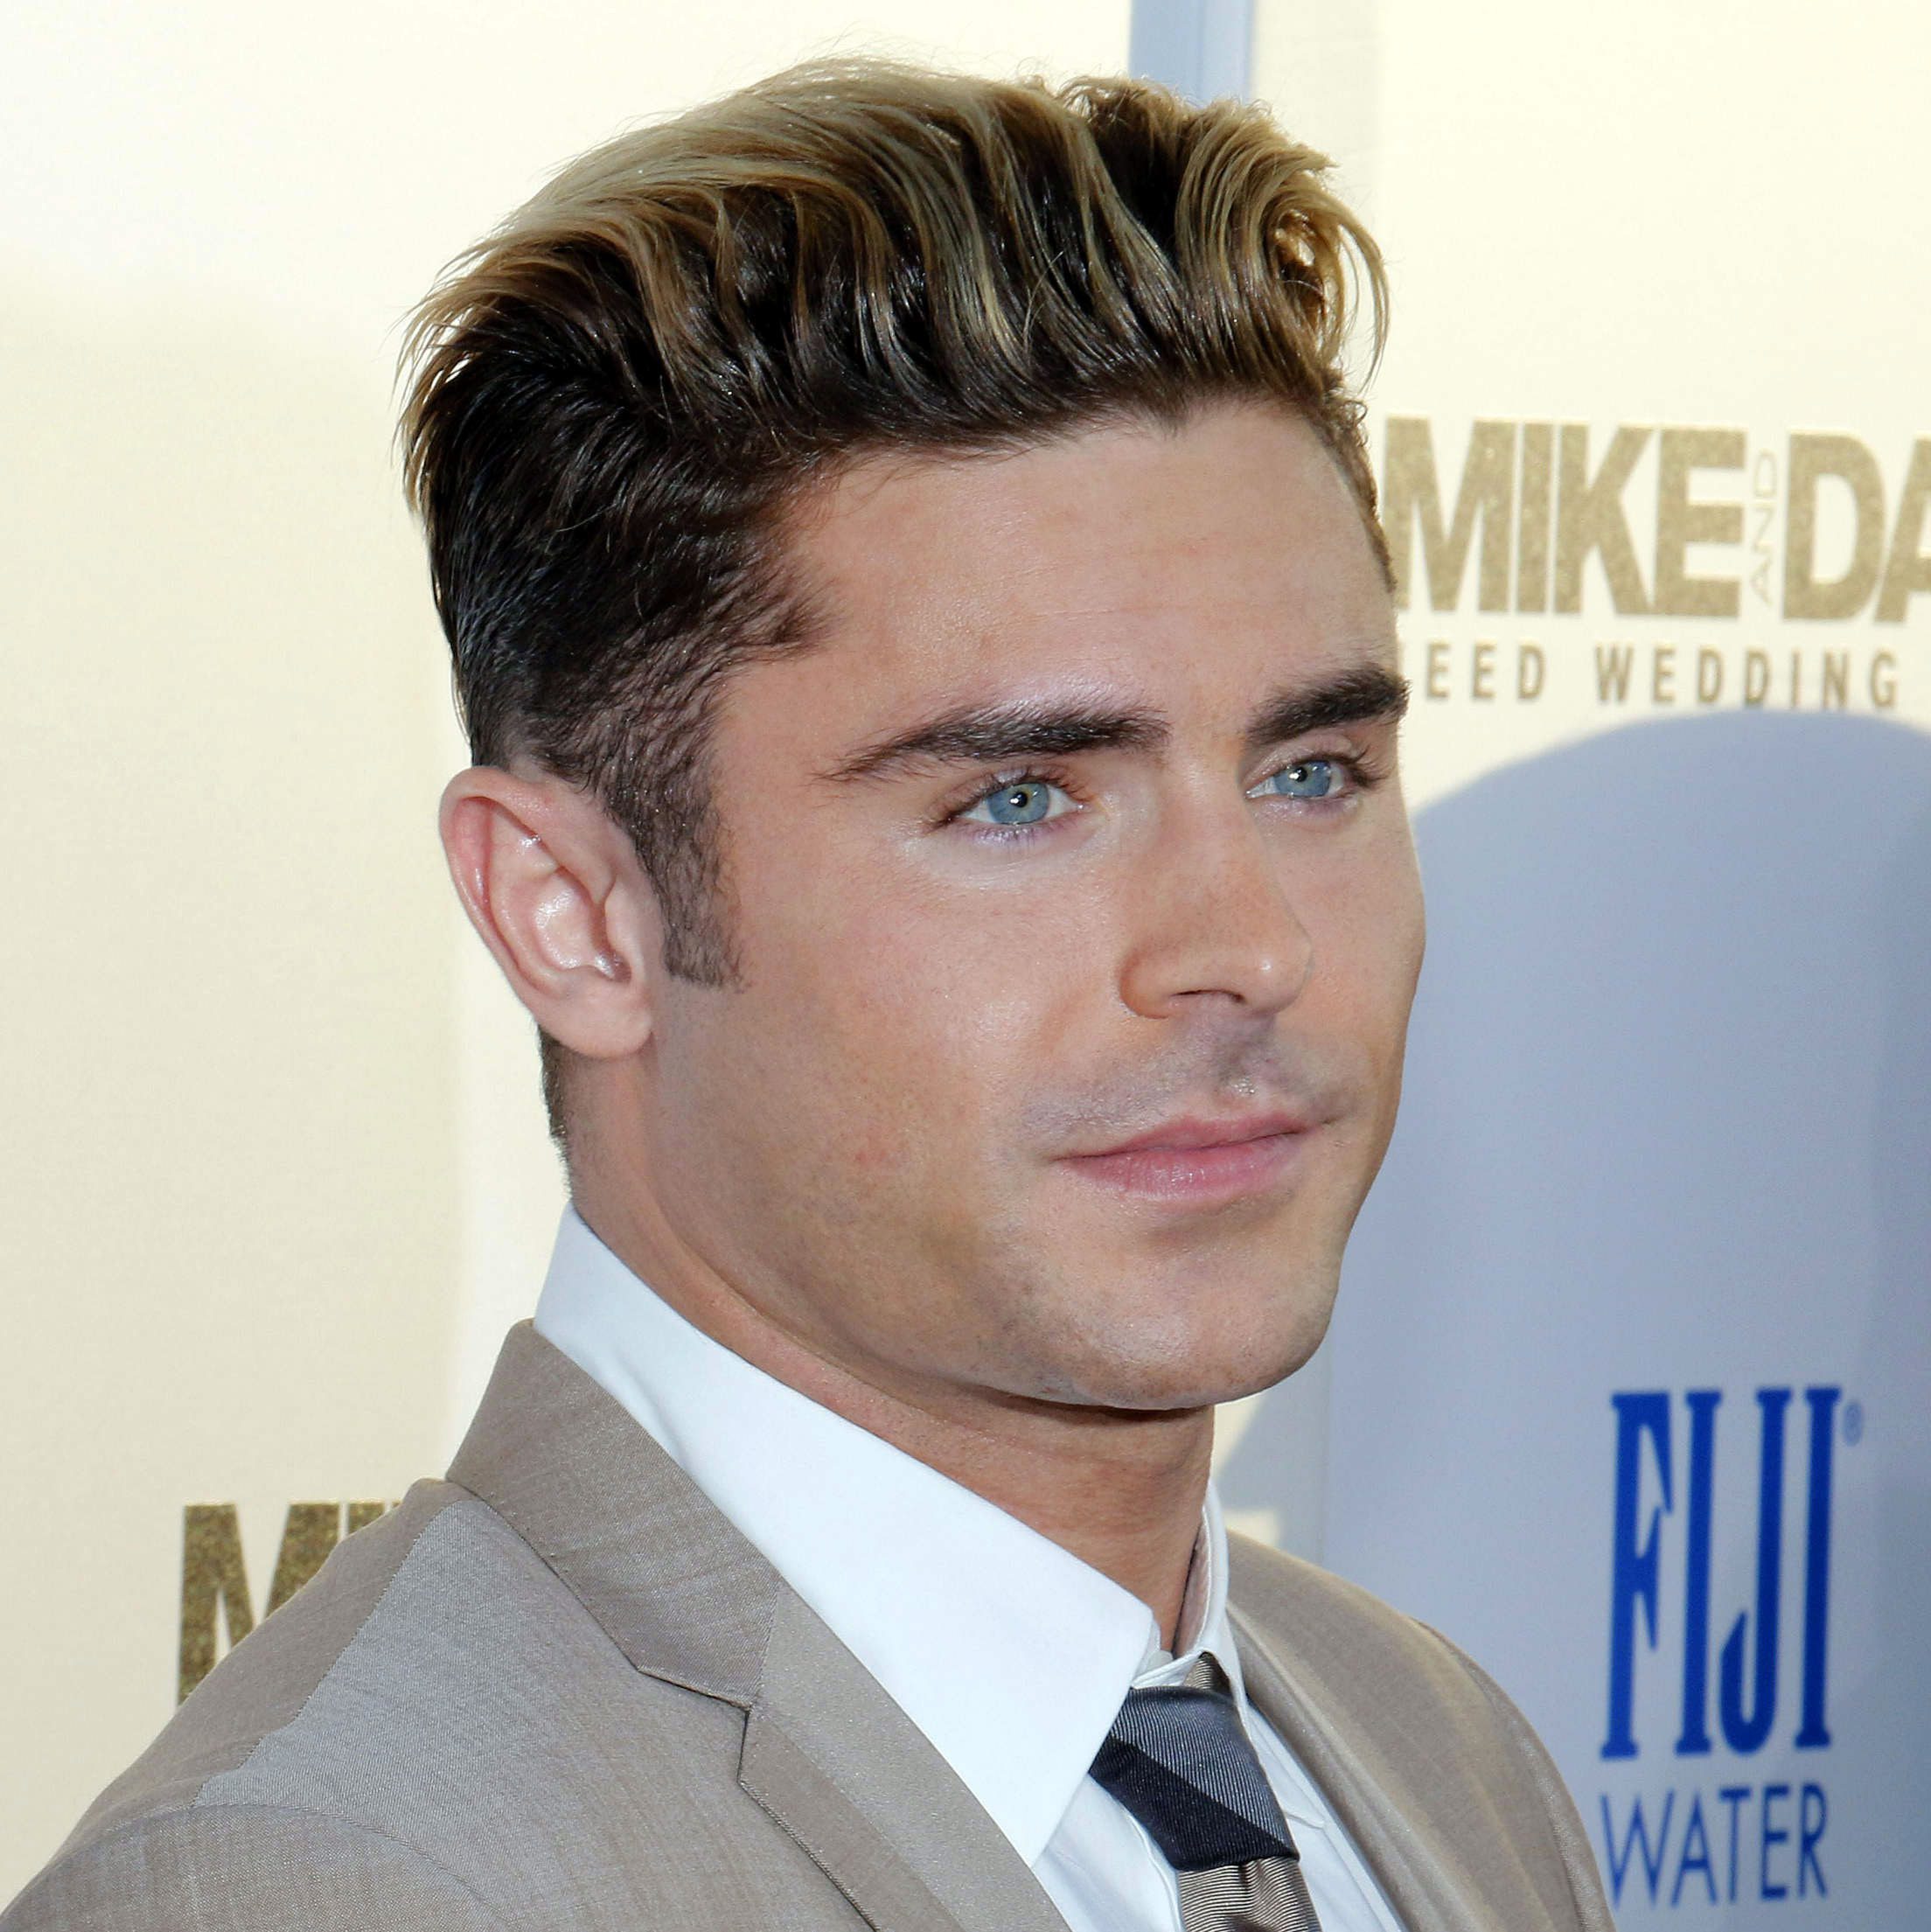 Trends in Men's Hair From 2000 to 2009